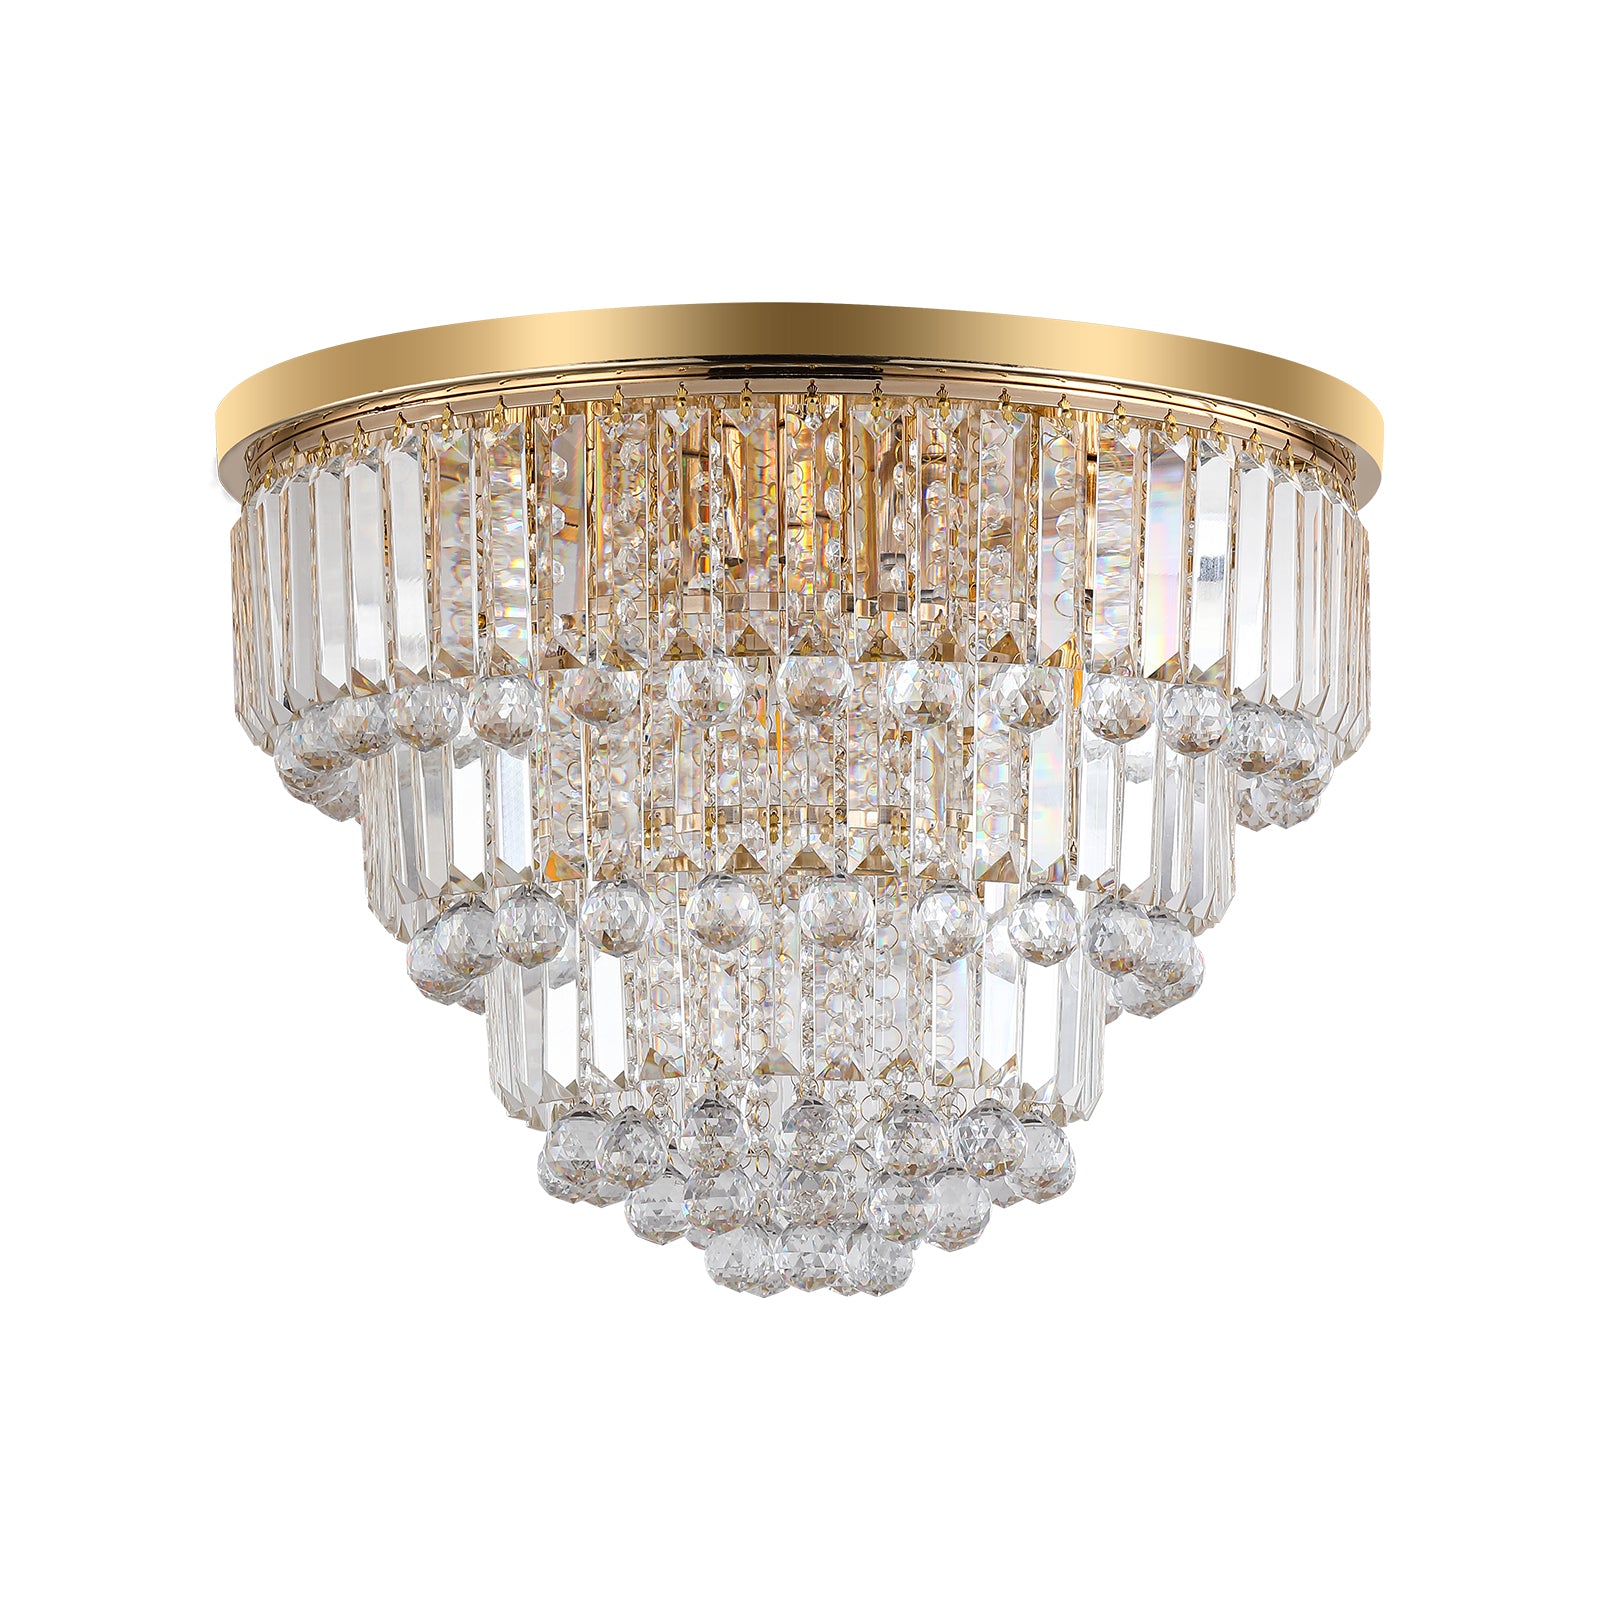 Gold luxury modern style crystal lights,large ceiling gold-luxury-crystal